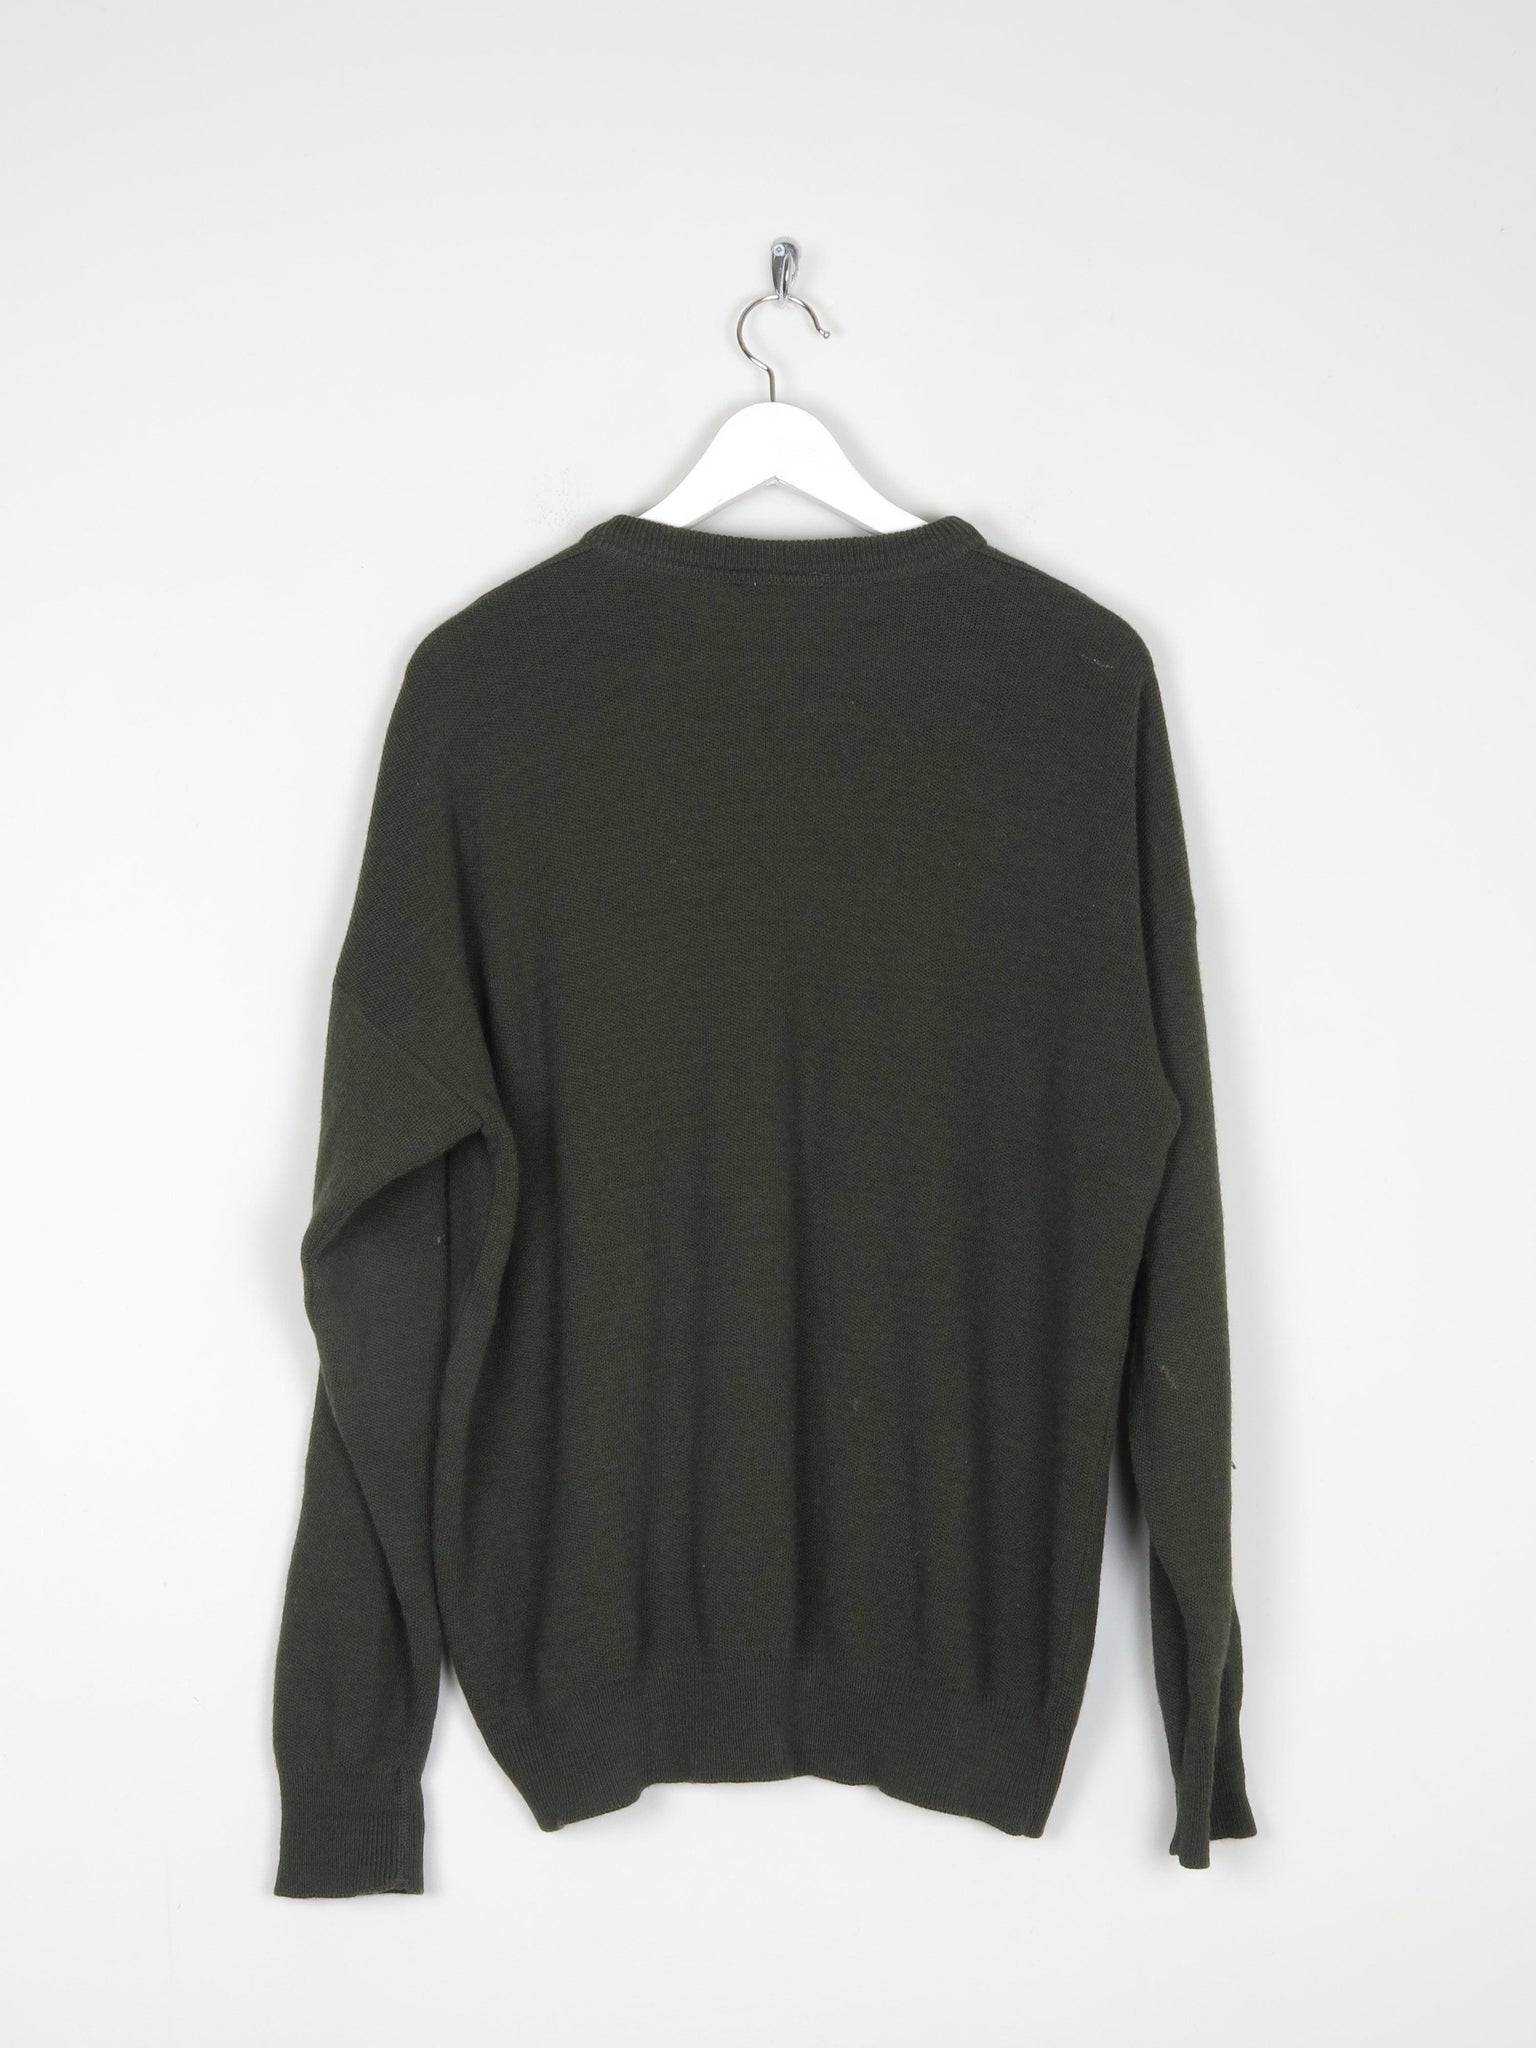 Mens Green Wool Lacoste Jumper M/L Size:5 - The Harlequin